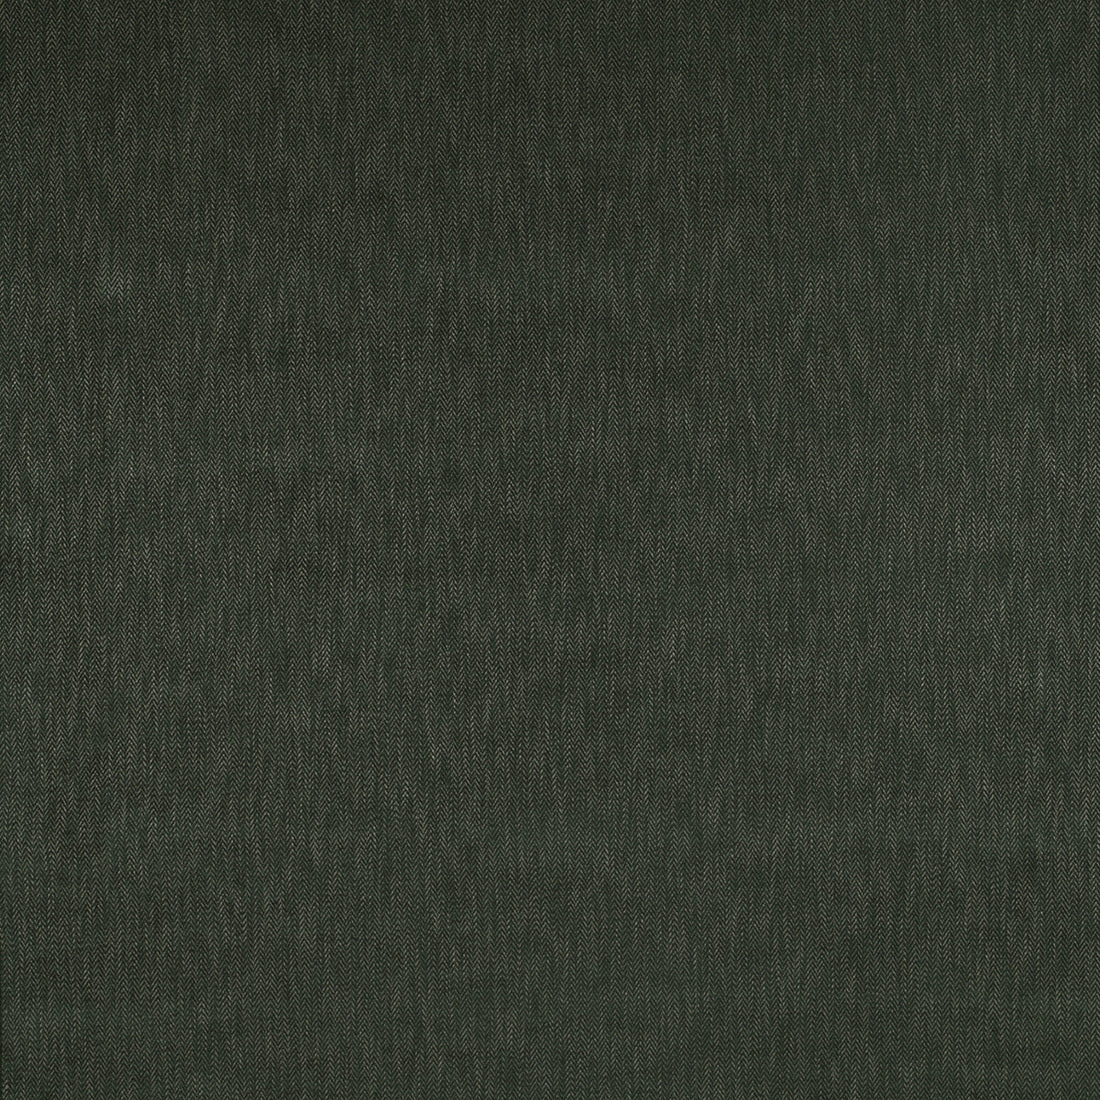 Alcala fabric in verde/oscuro color - pattern GDT5201.002.0 - by Gaston y Daniela in the Madrid collection